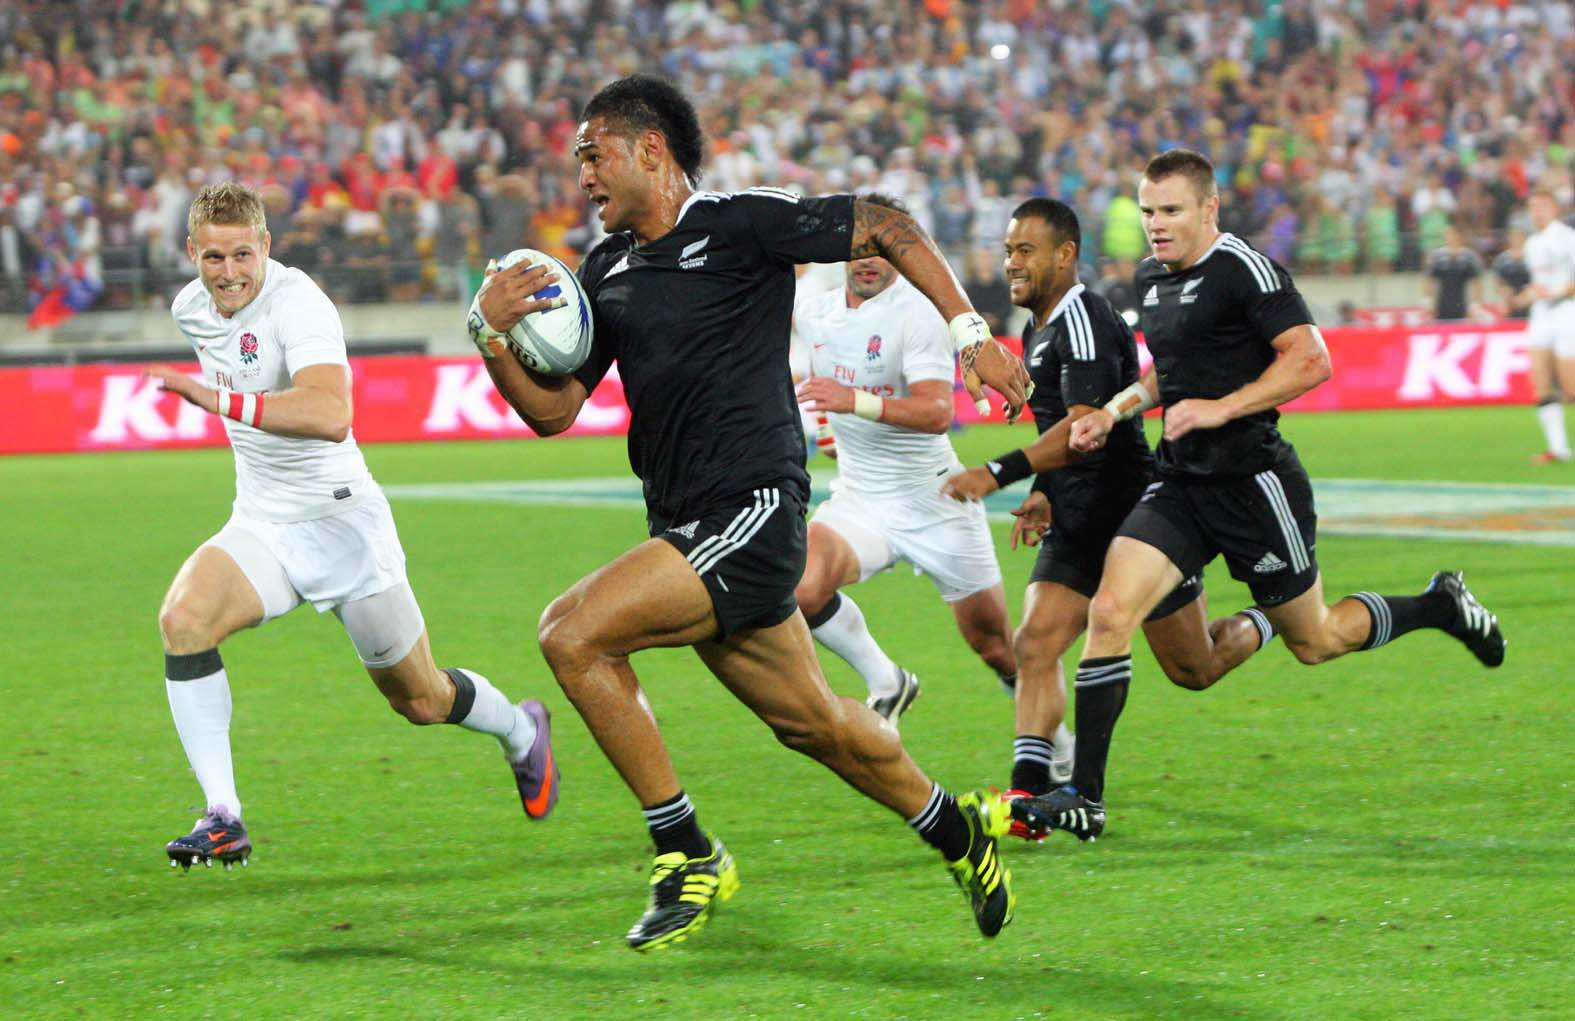 Rotorua to host National Rugby Sevens